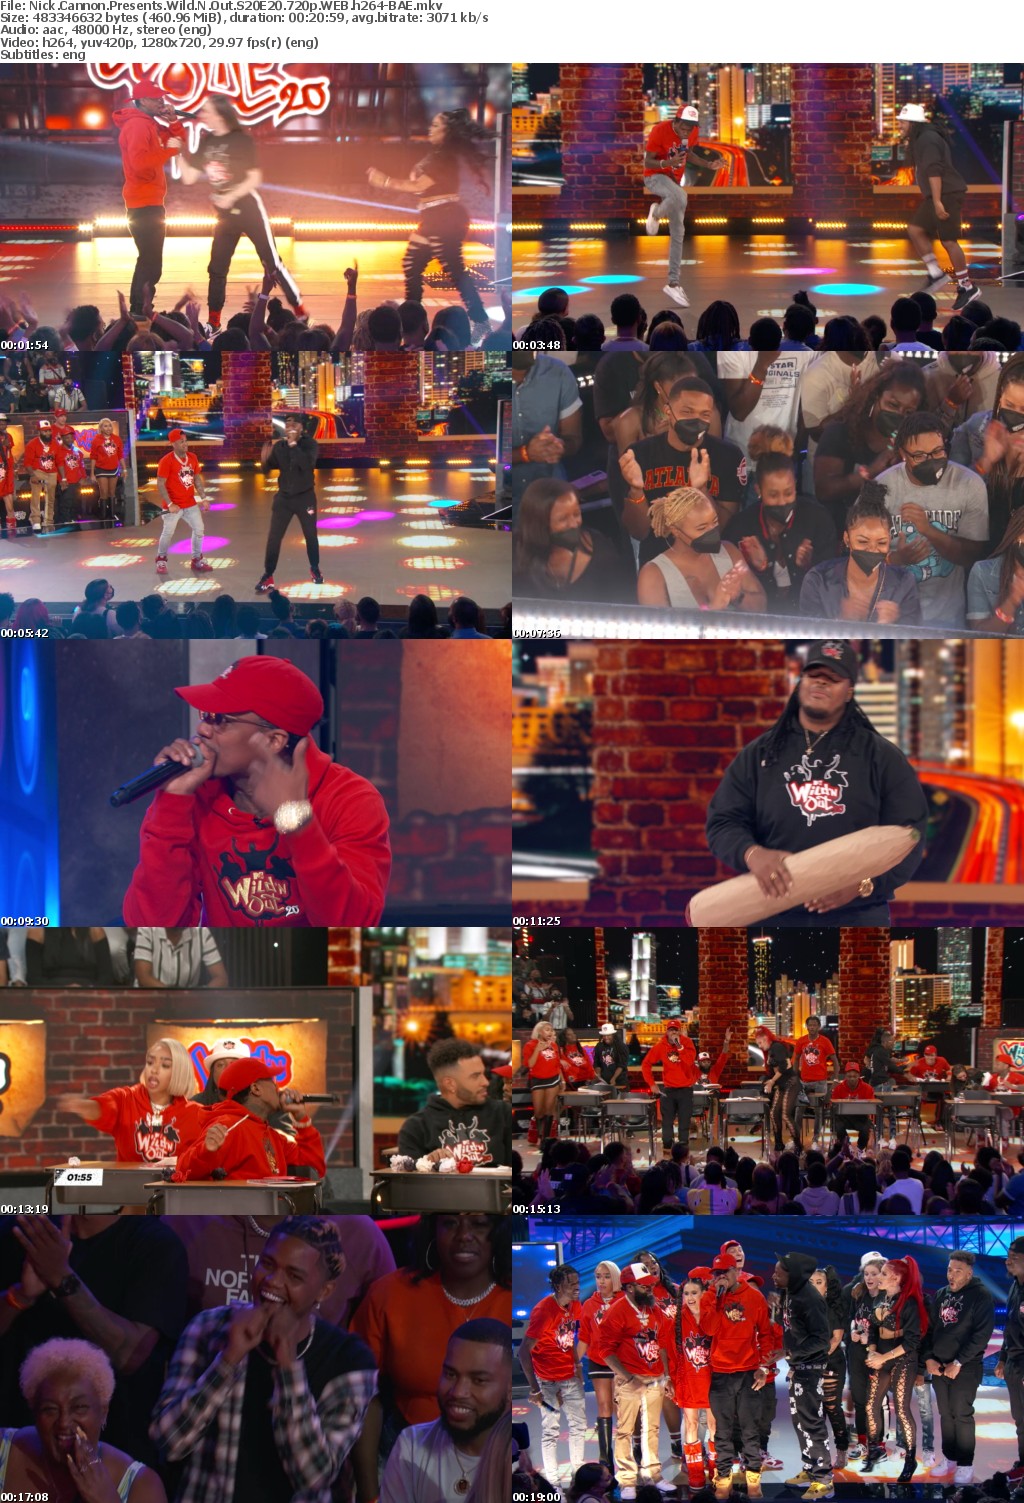 Nick Cannon Presents Wild N Out S20E20 720p WEB h264-BAE